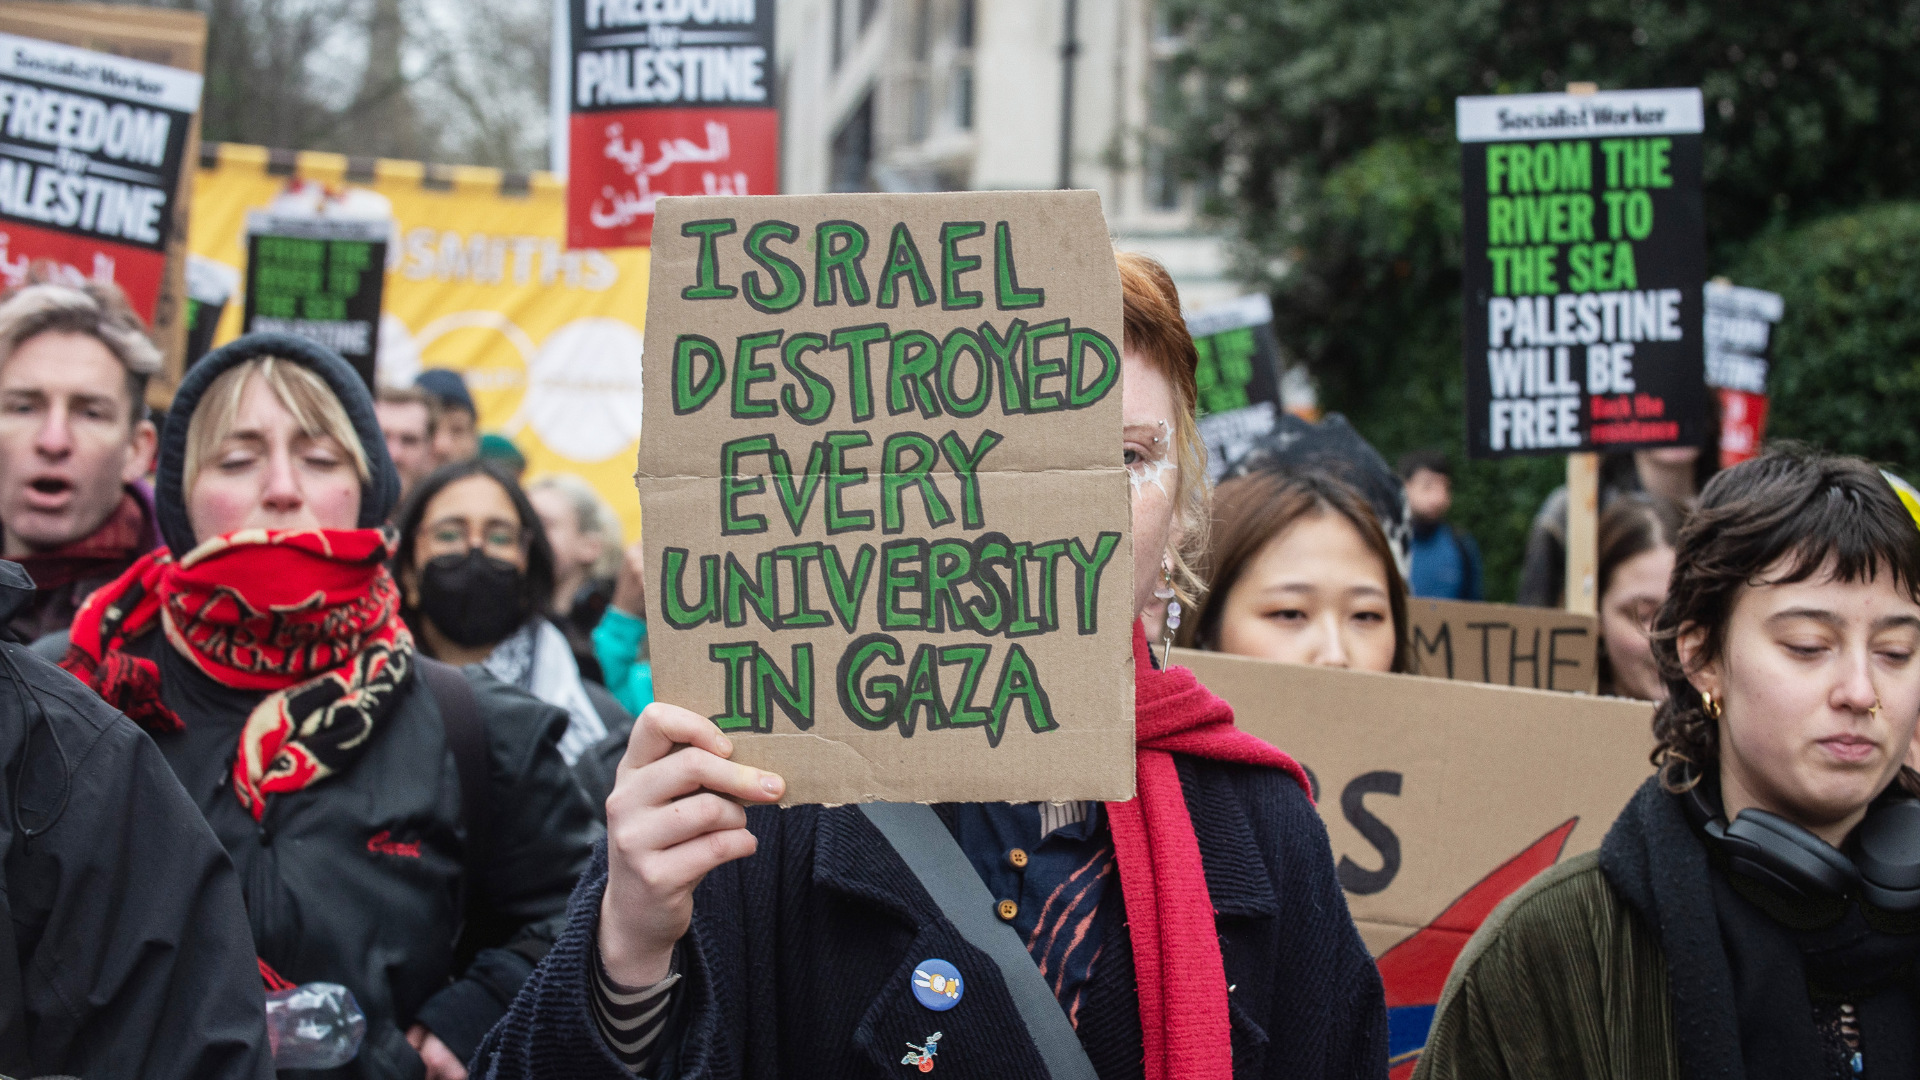 Students marching in London in protest against the Israeli bombardment of Gaza. Photo: Guy Smallman/Getty